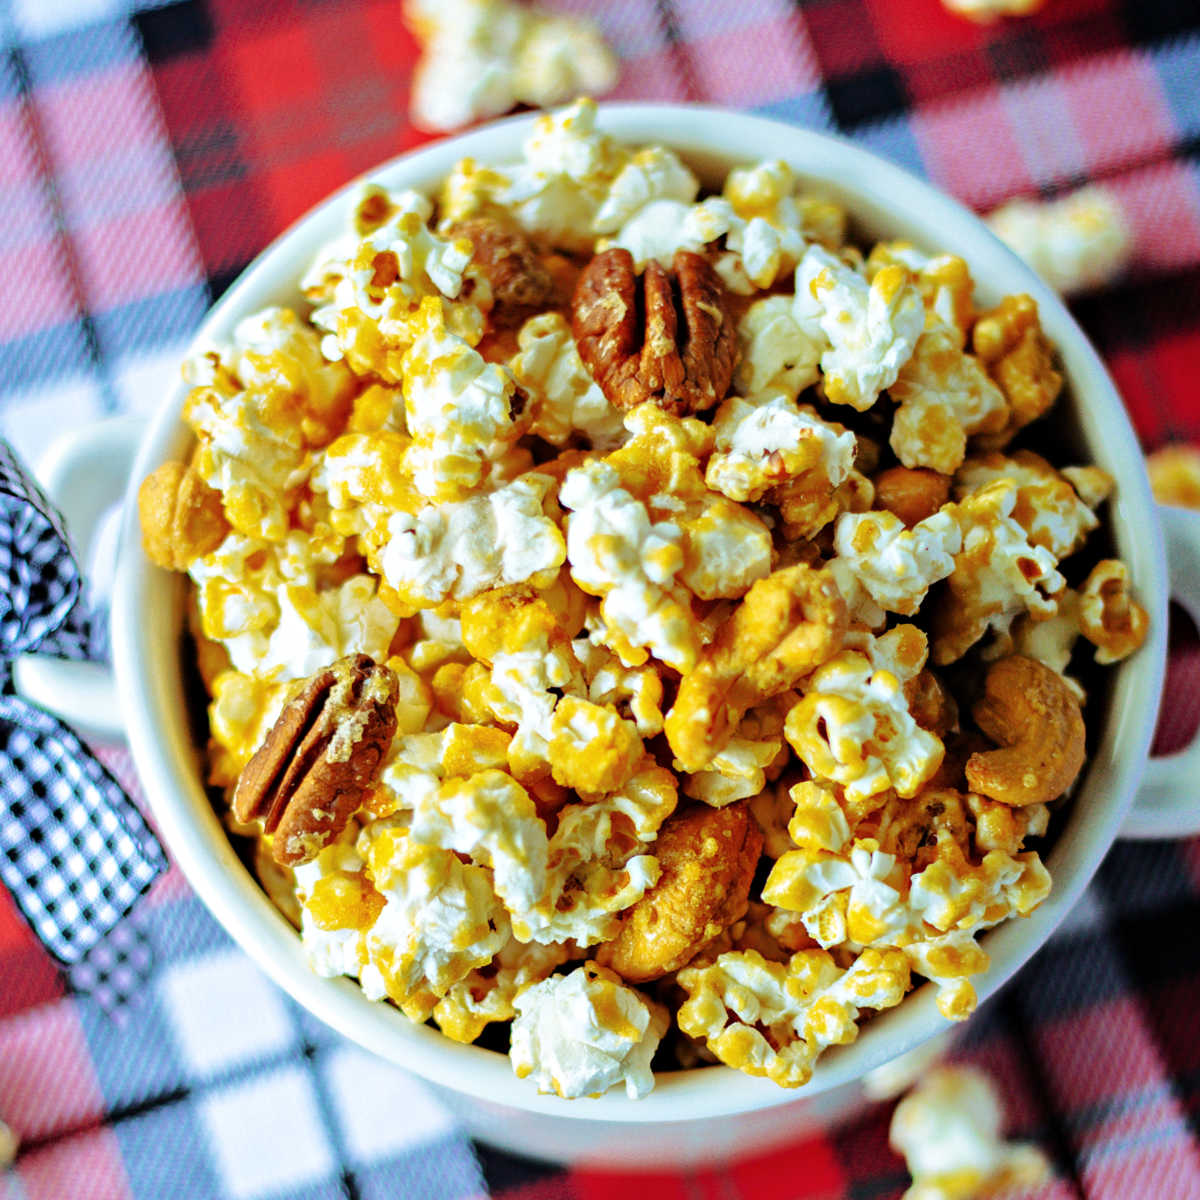 Homemade Caramel Corn with Nuts - Life, Love, and Good Food